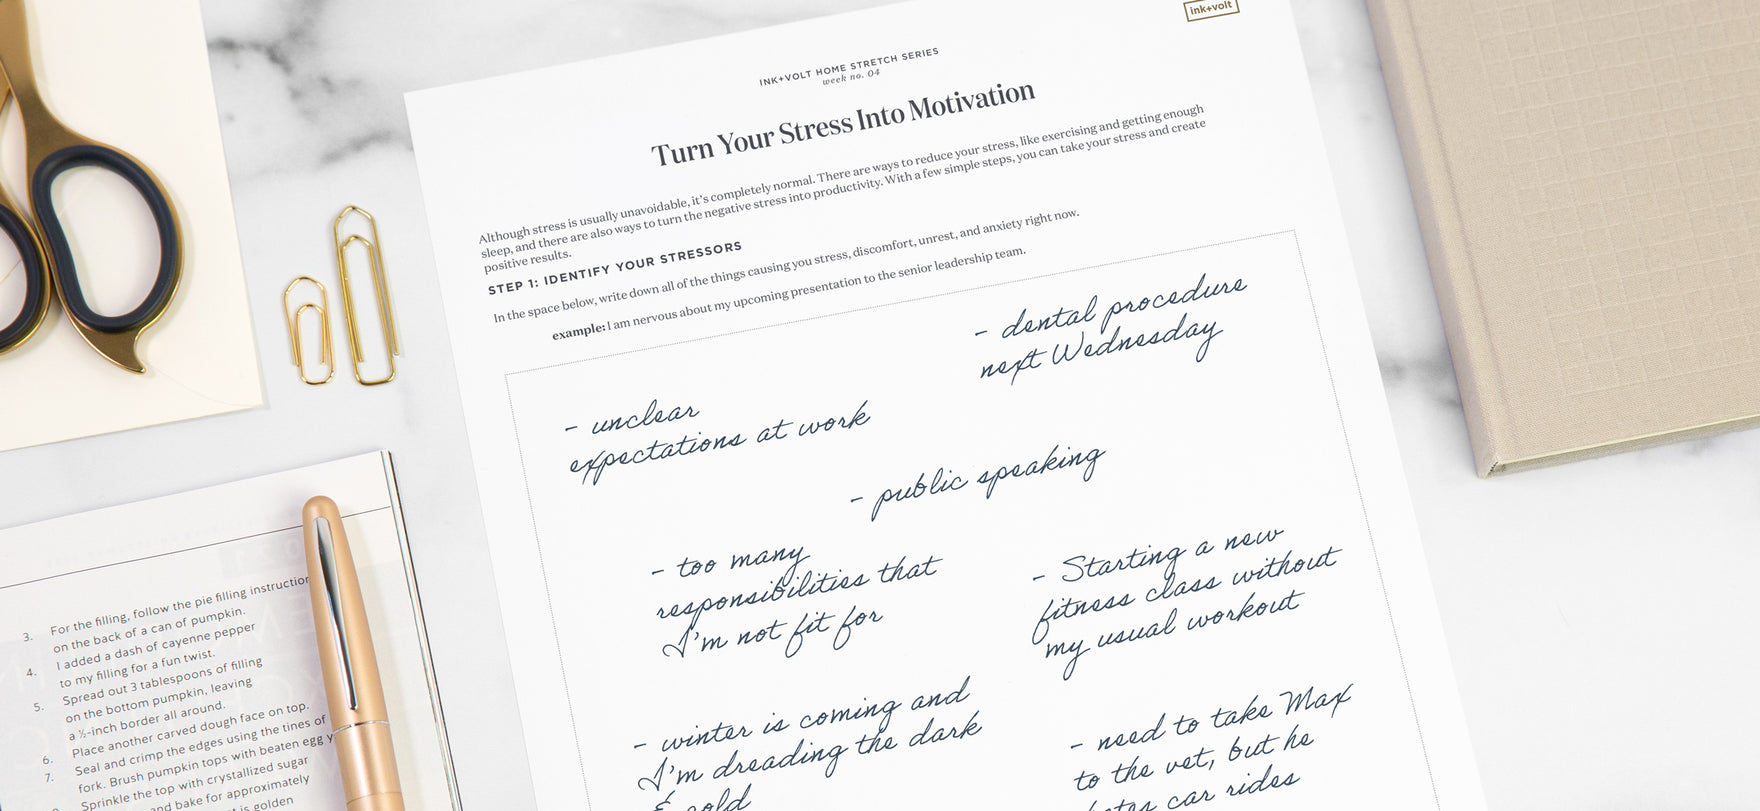 A worksheet titled "turn your stress into motivation" on a desk with accessories